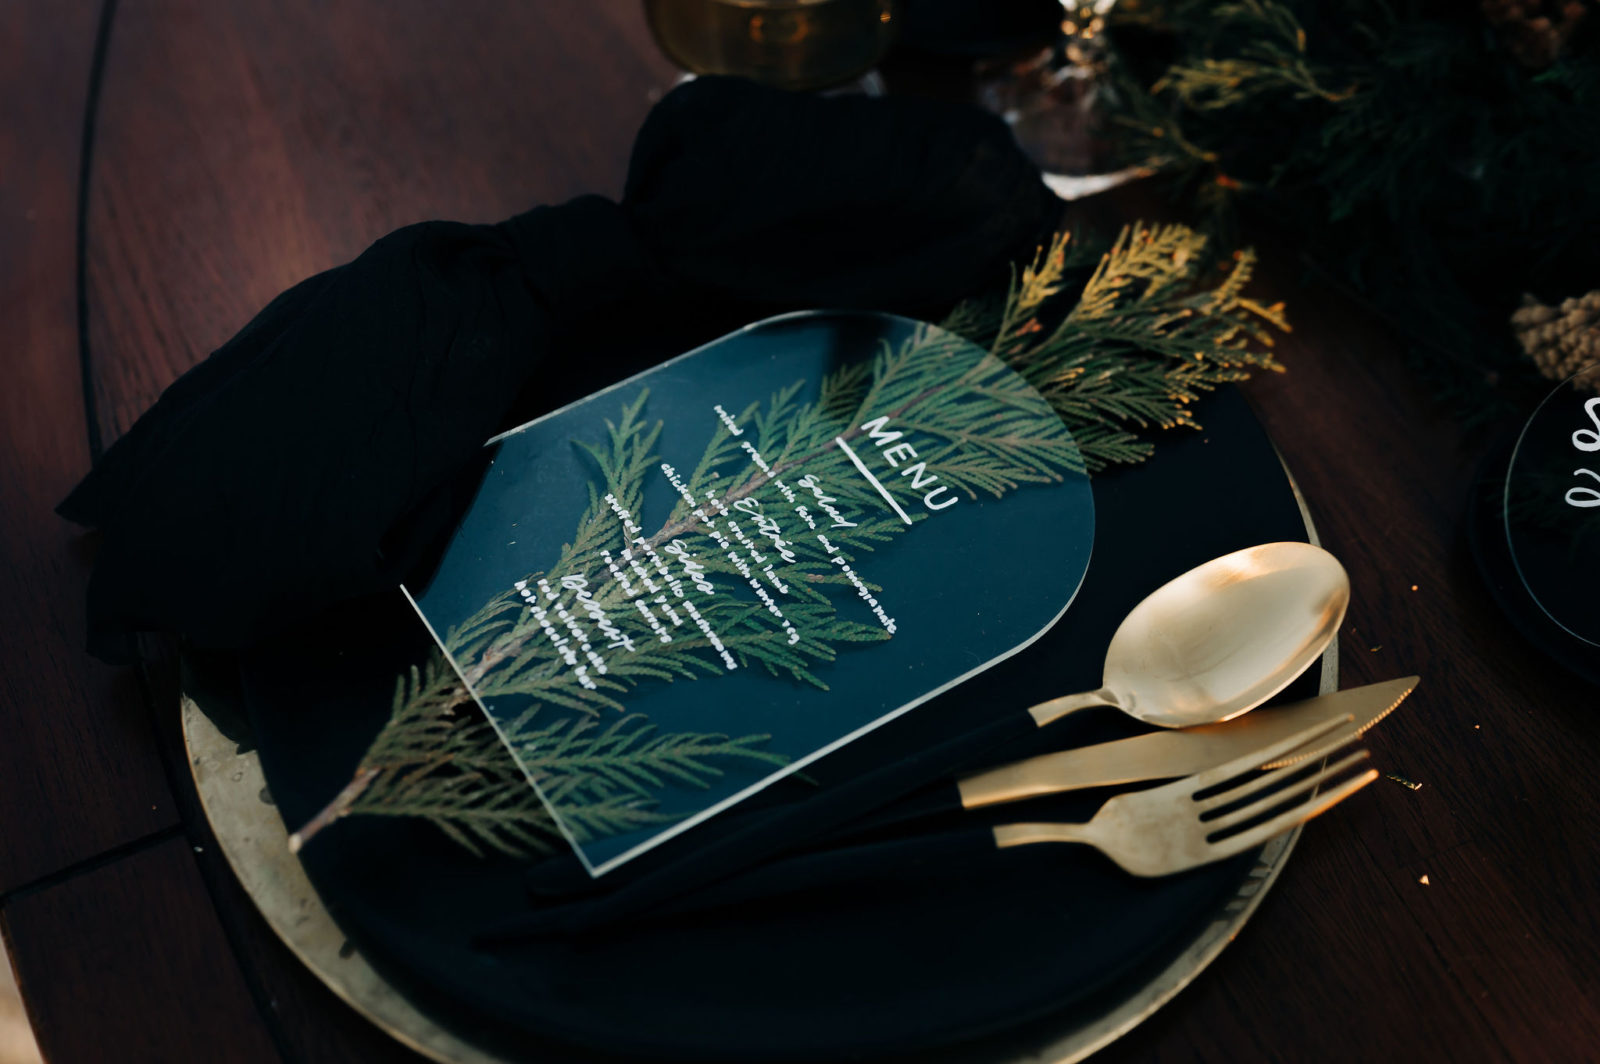 Acrylic arch menu on top of pine accent for rustic winter tablescape